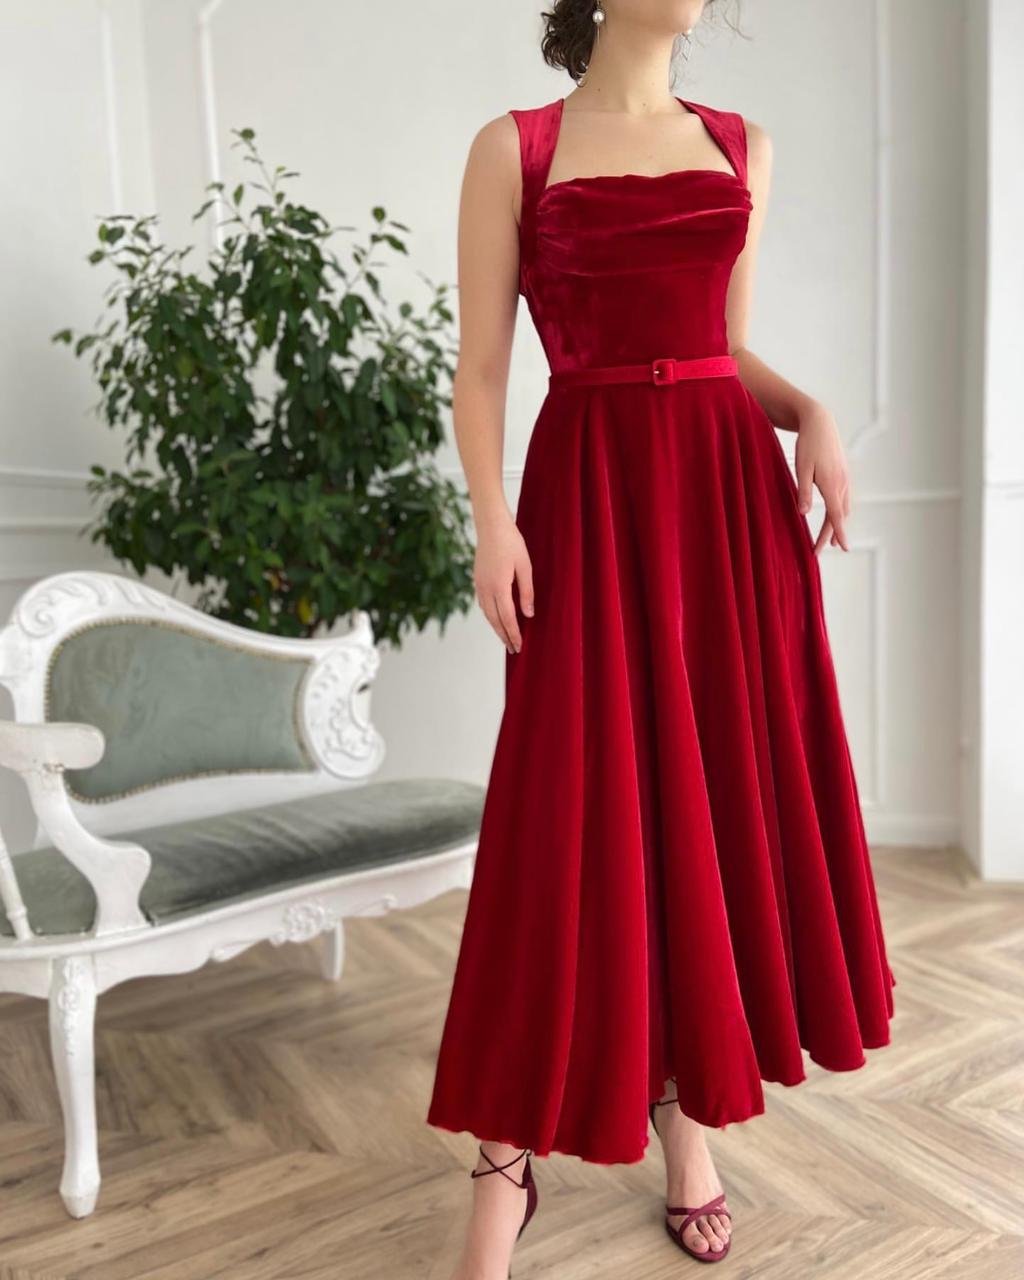 Red midi dress with straps